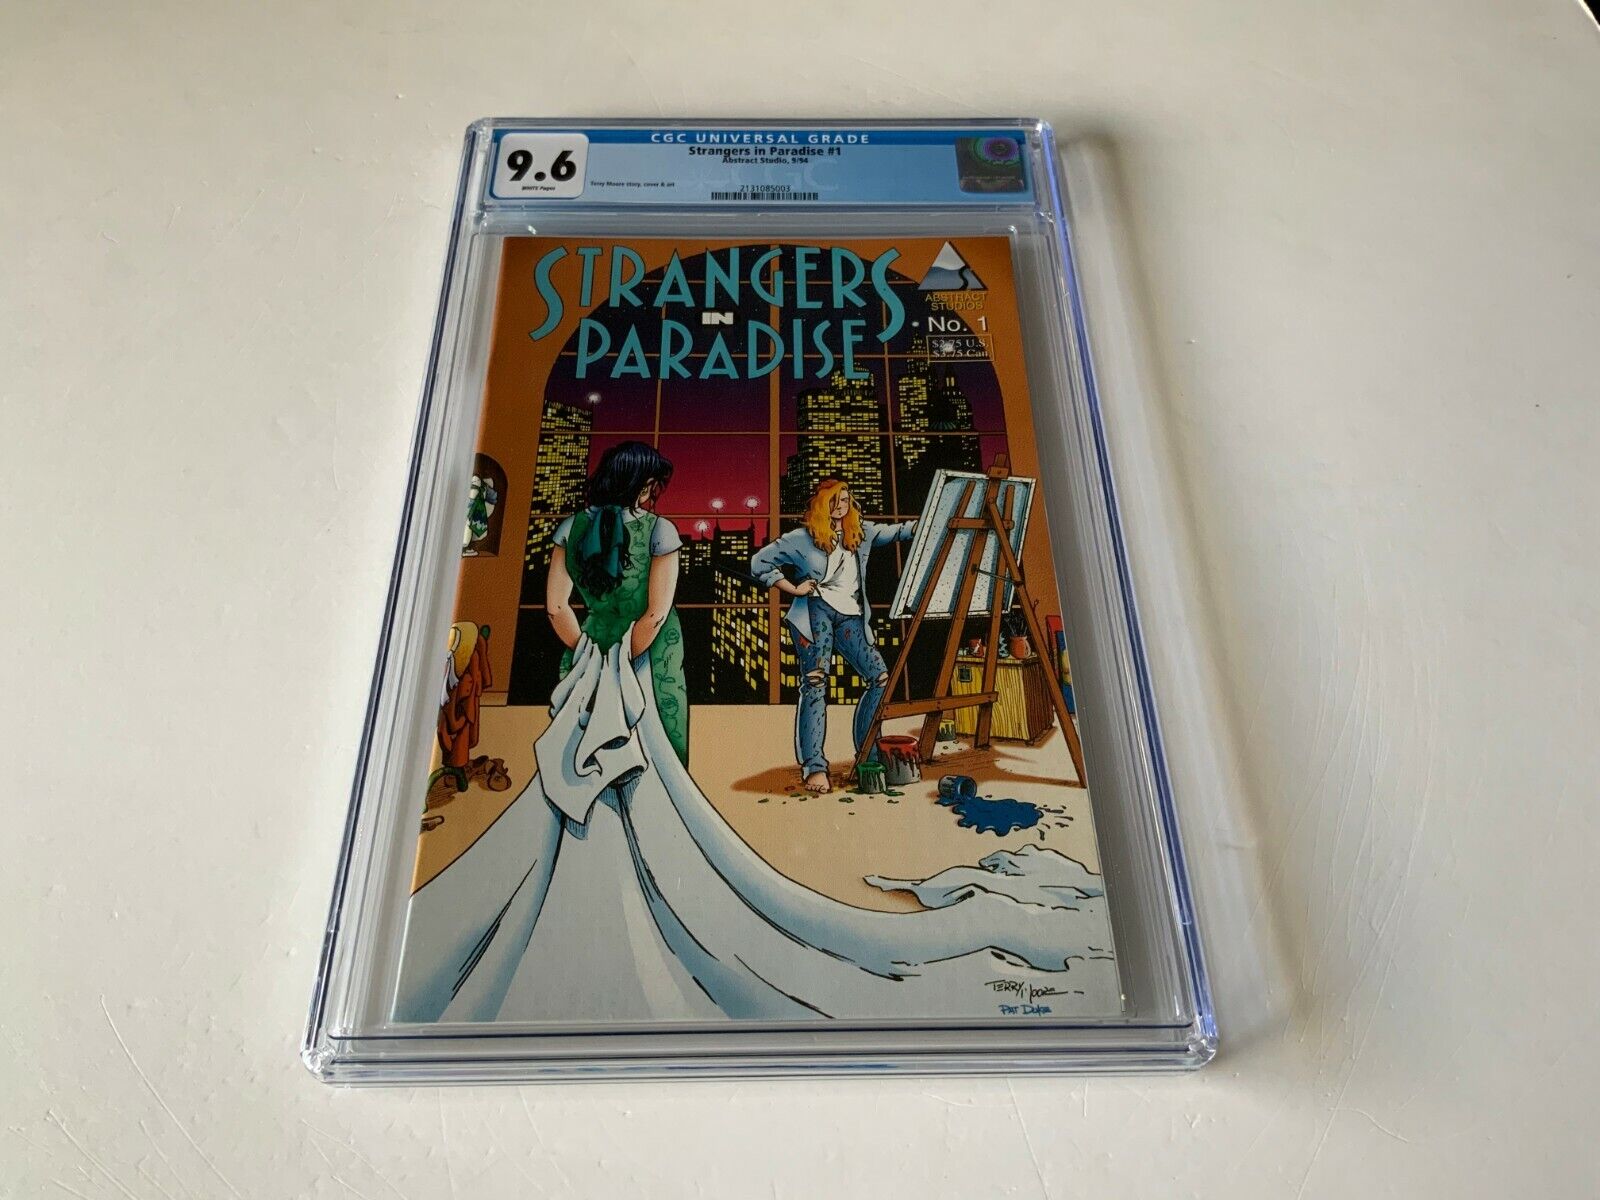 STRANGERS IN PARADISE 1 CGC 9.6 WHITE PAGES TERRY MOORE ABSTRACT STUDIOS COMICS